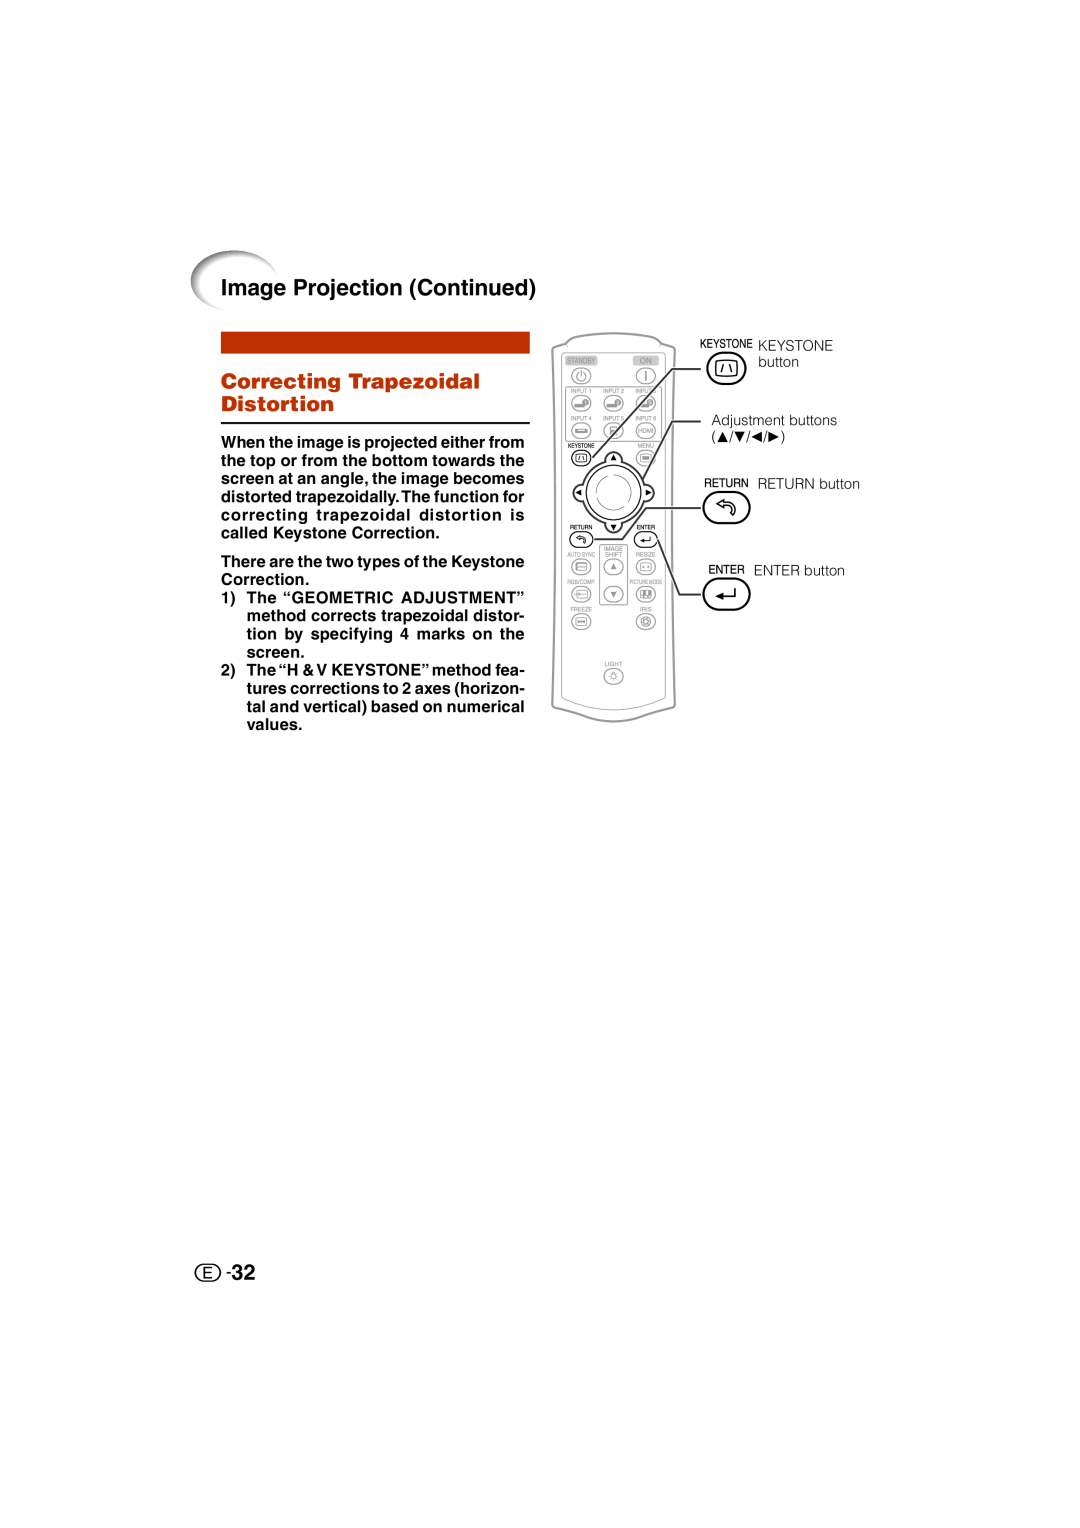 Sharp XV-Z3000U operation manual Correcting Trapezoidal Distortion, Image Projection Continued 